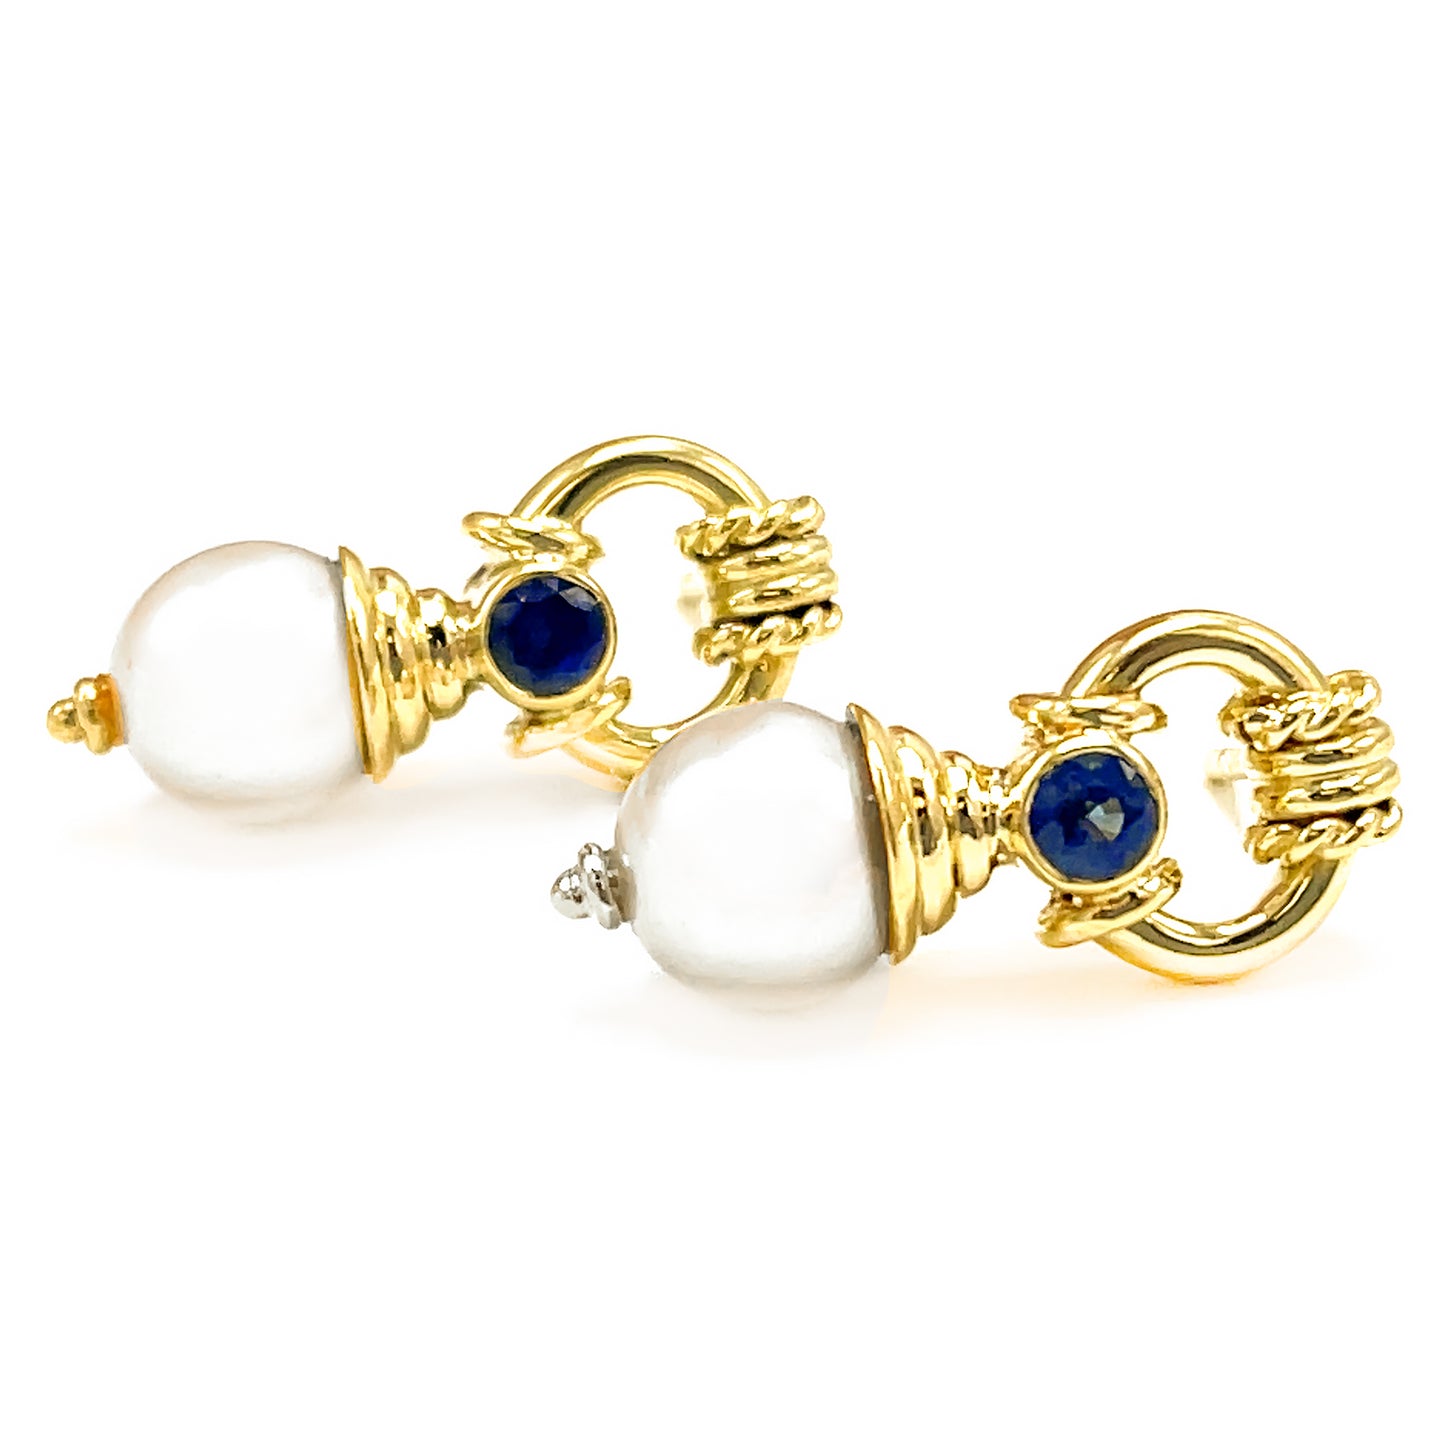 Pearls and Sapphire Dangle Estate Earrings